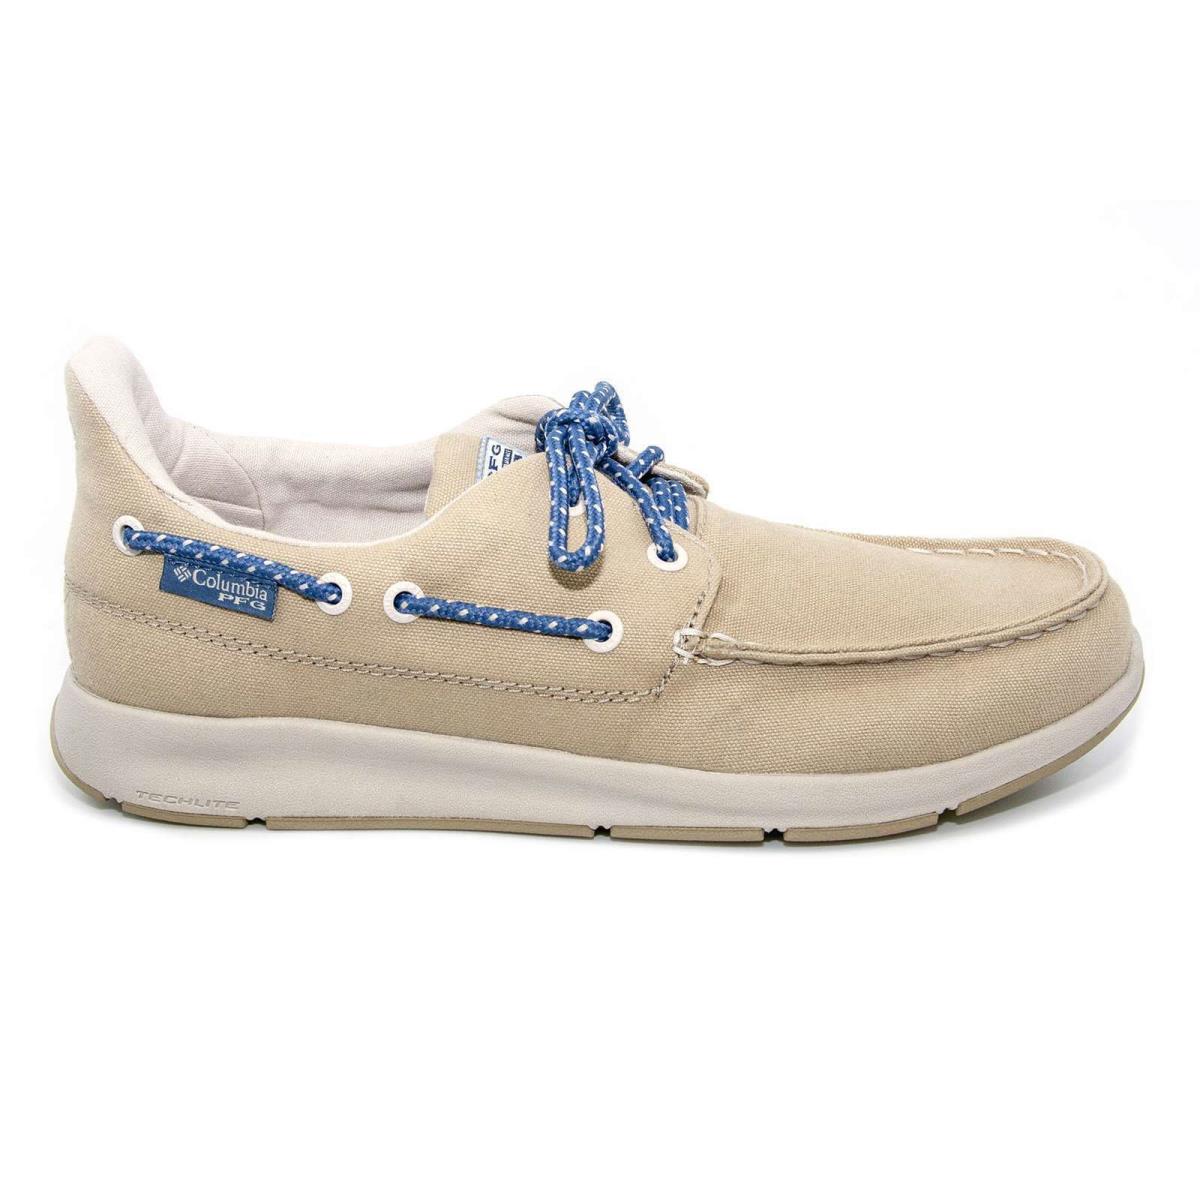 Columbia Men`s Delray Pfg Water Boat Fishing Shoes Slip On Loafers